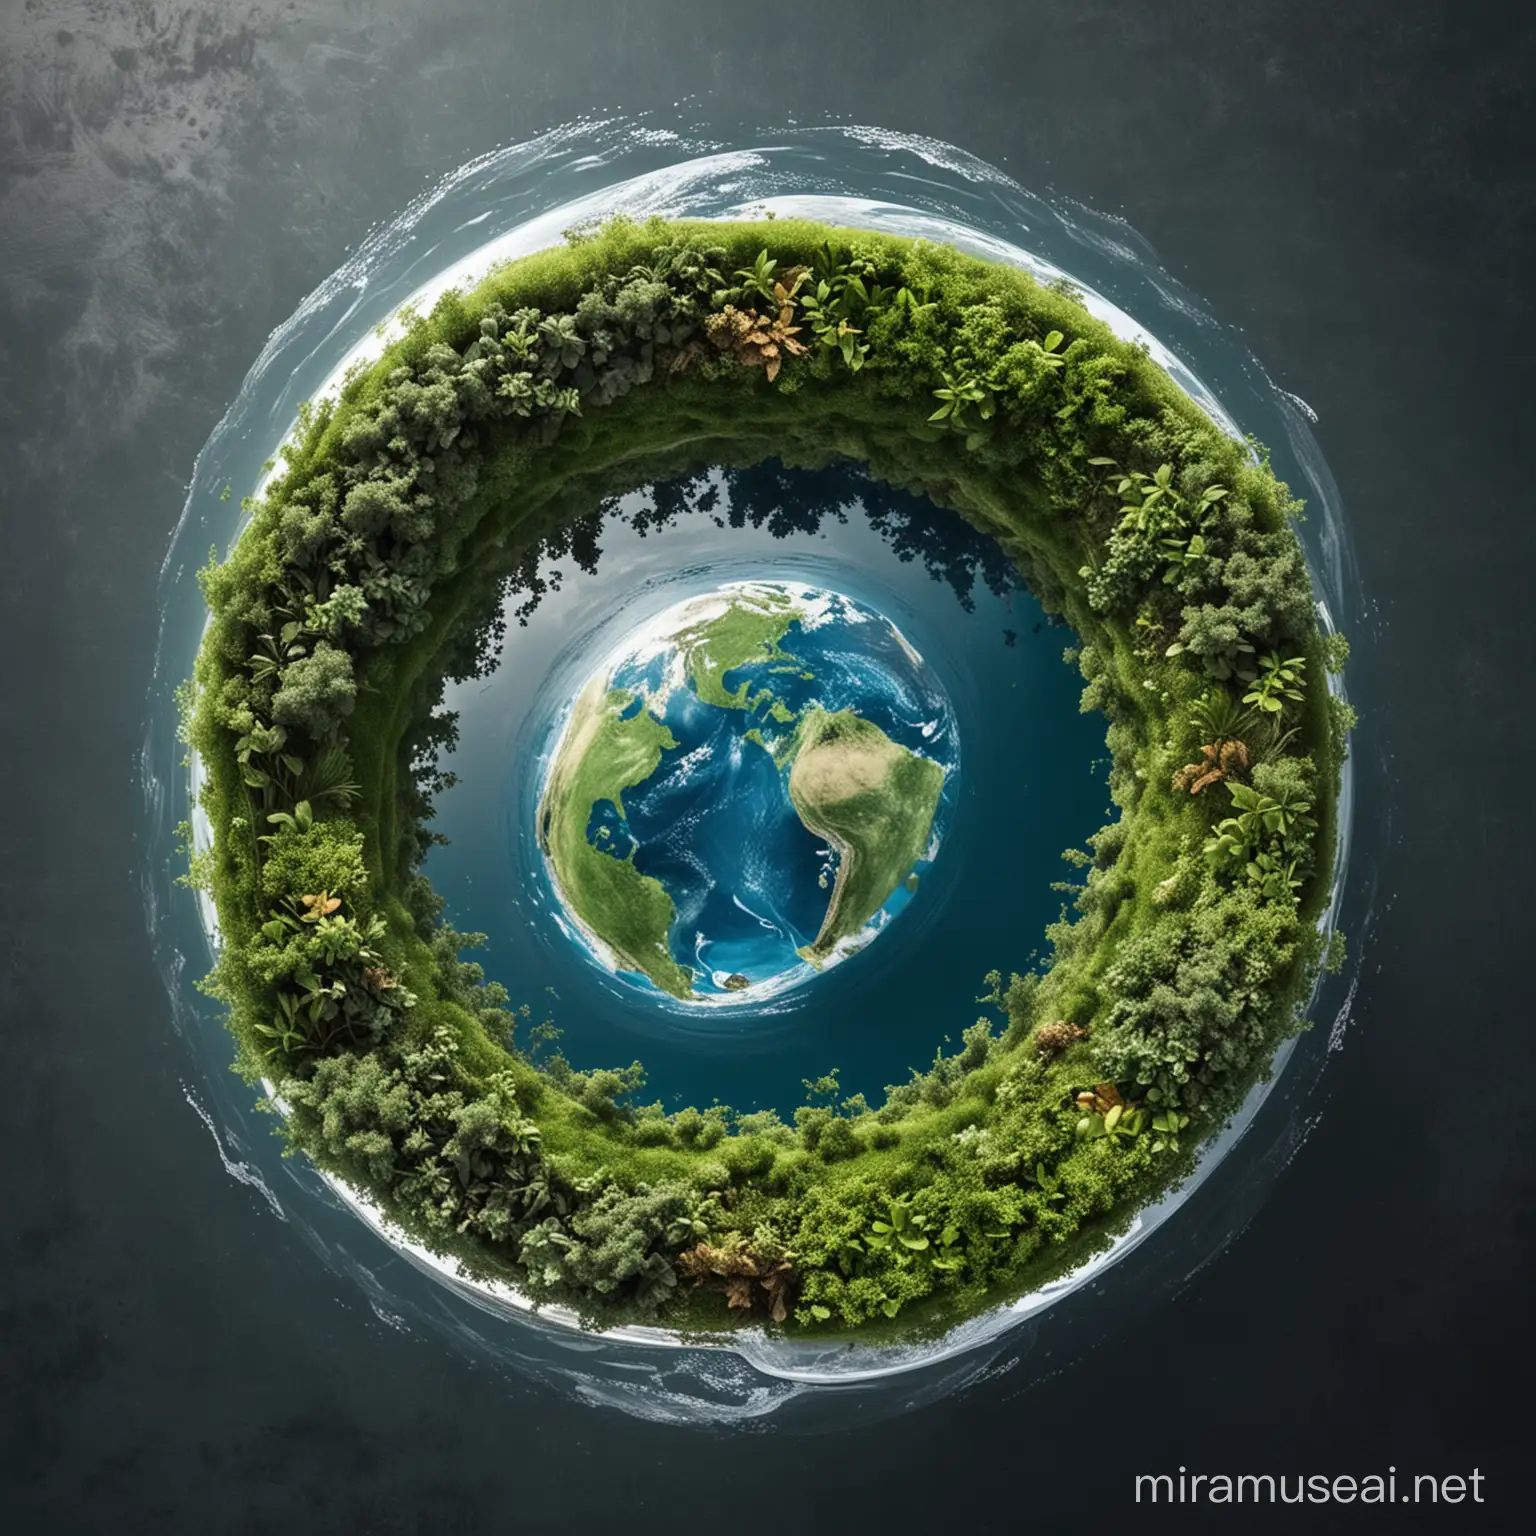 Generate an earth image. make it in 2 half where left half is greenery and water and the right half is plastic waste.